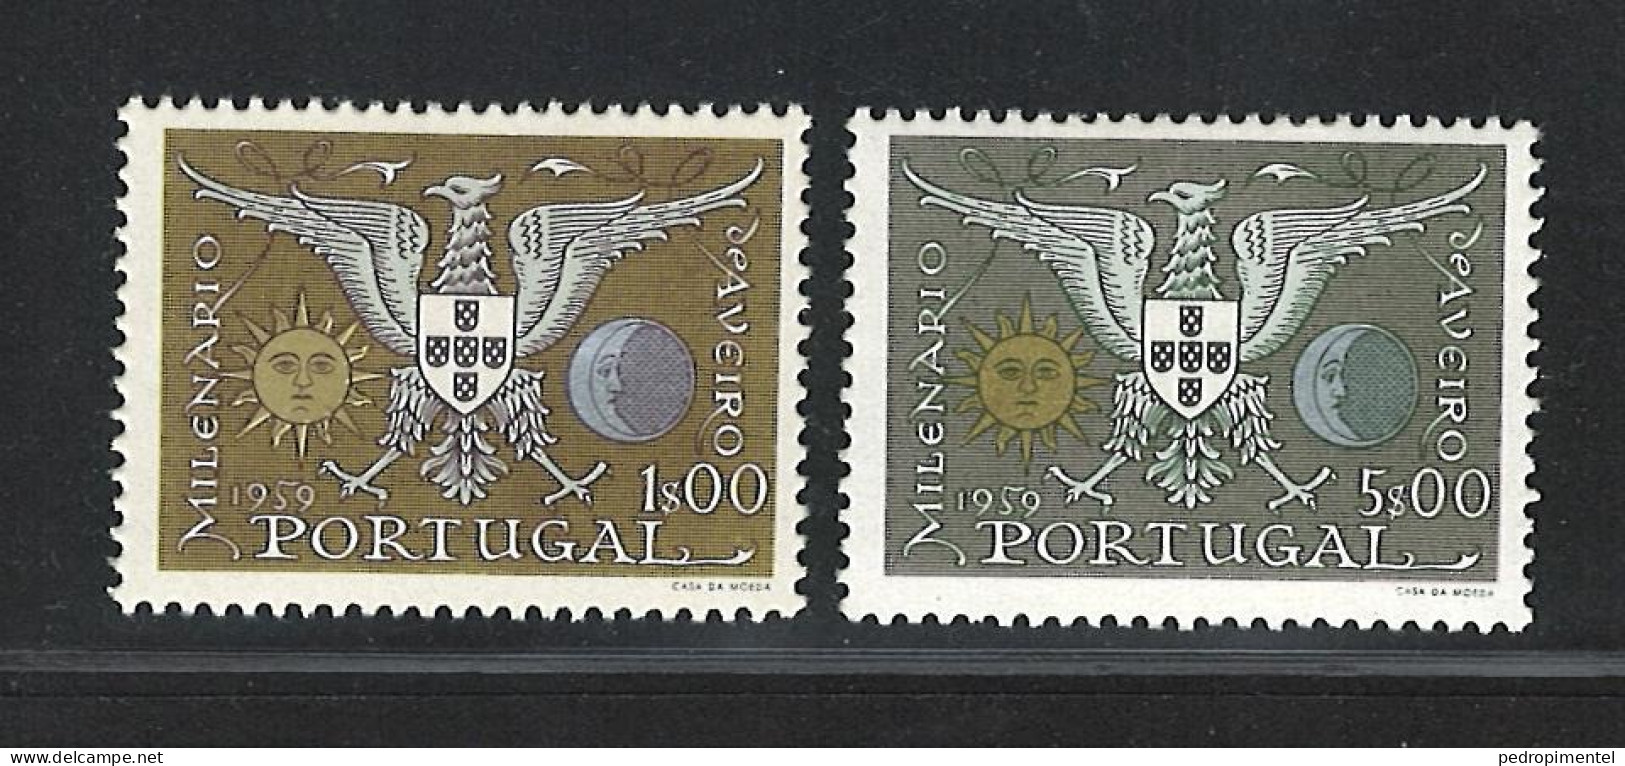 Portugal Stamps 1959 "City Of Aveiro" Condition MH #847-848 - Unused Stamps